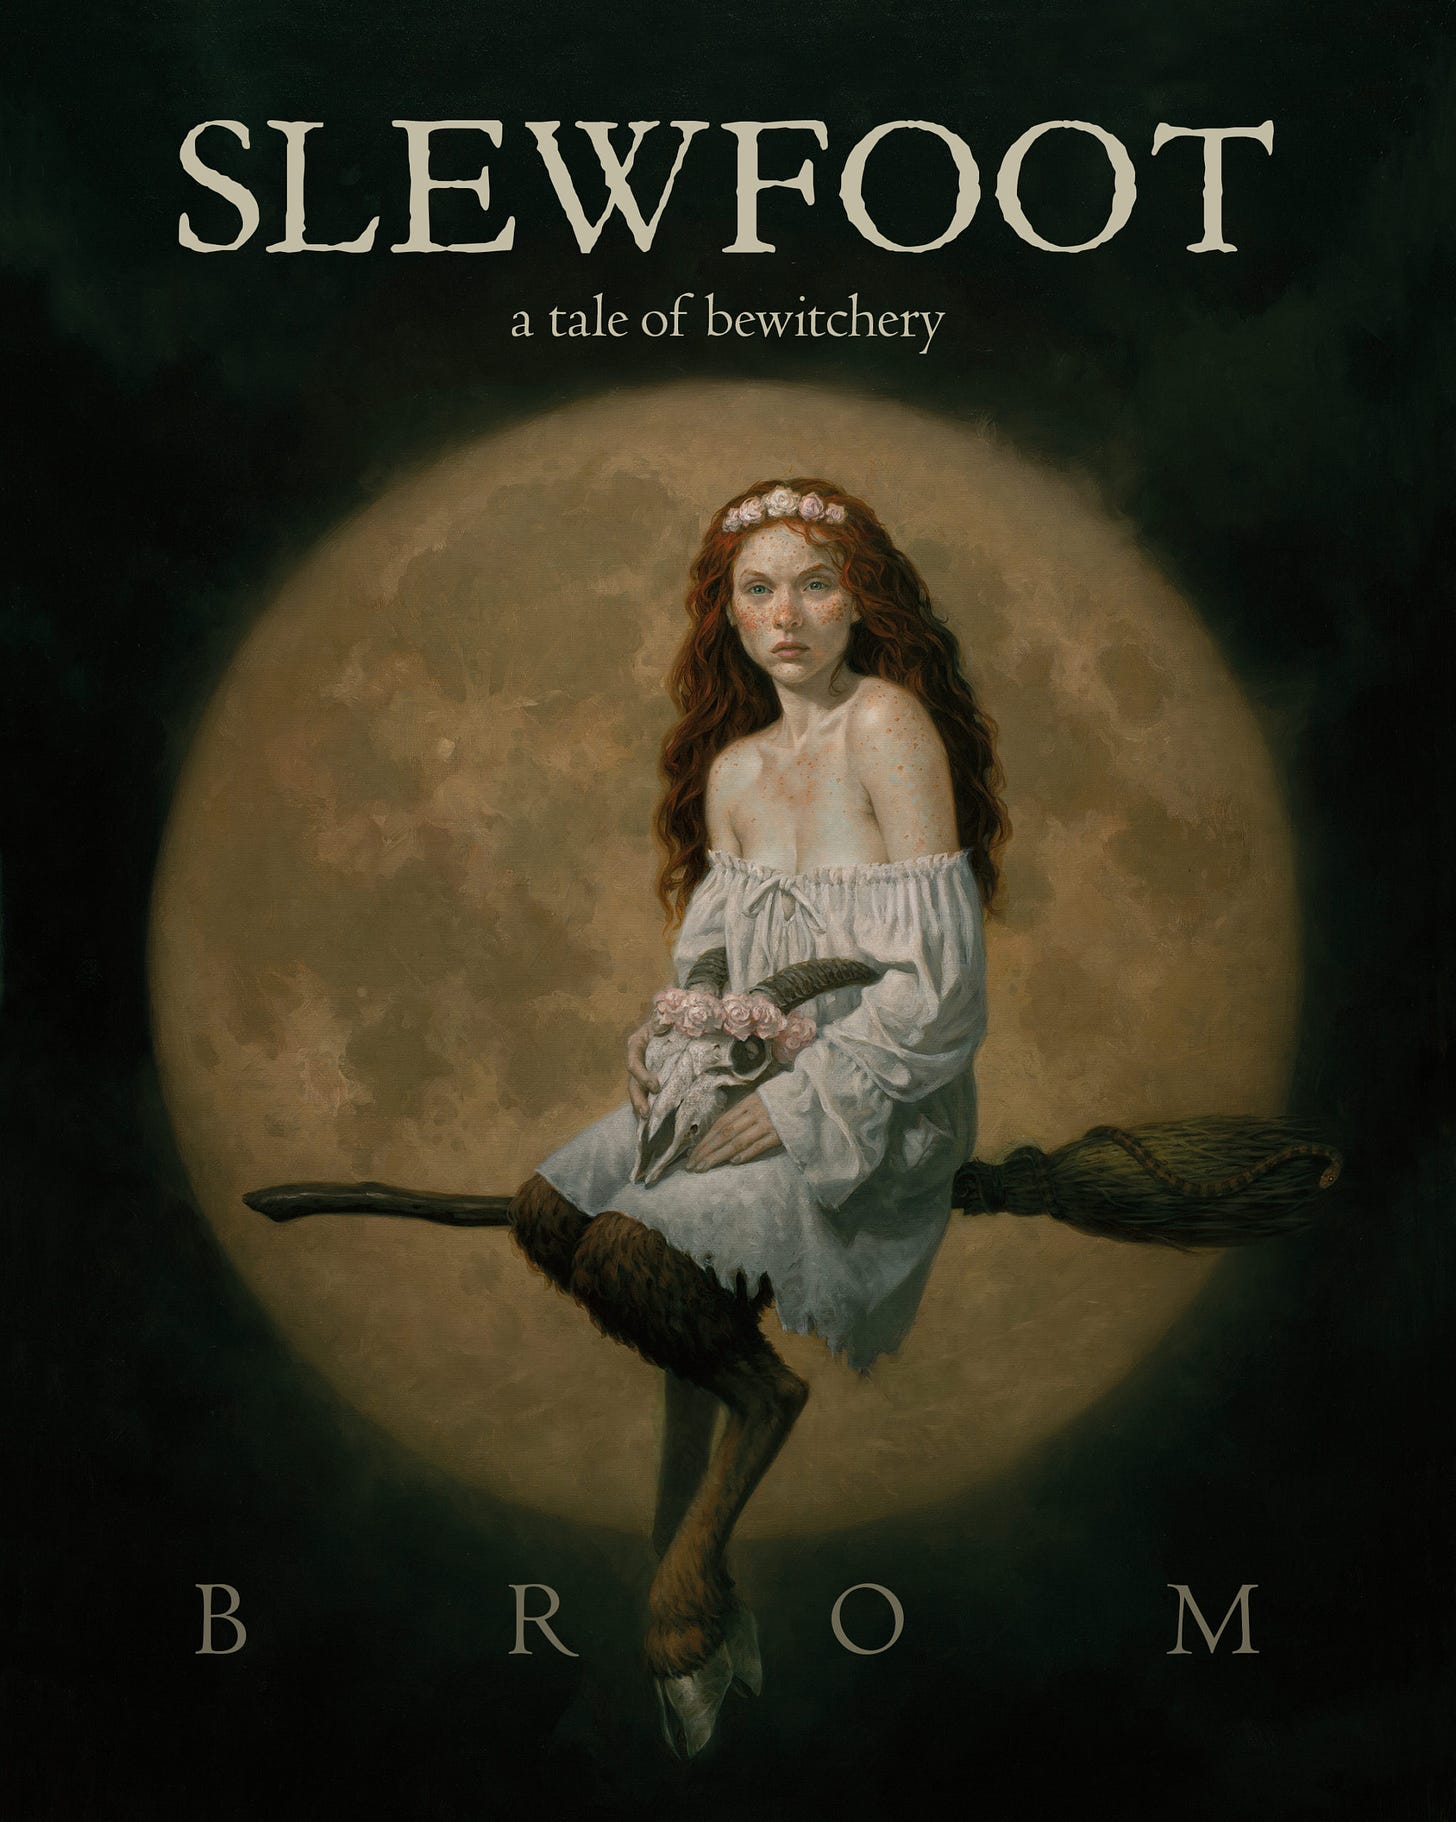 Book cover for Slewfoot by Brom with a young woman in a white dress with goat feet riding a broomstick in front of a golden moon